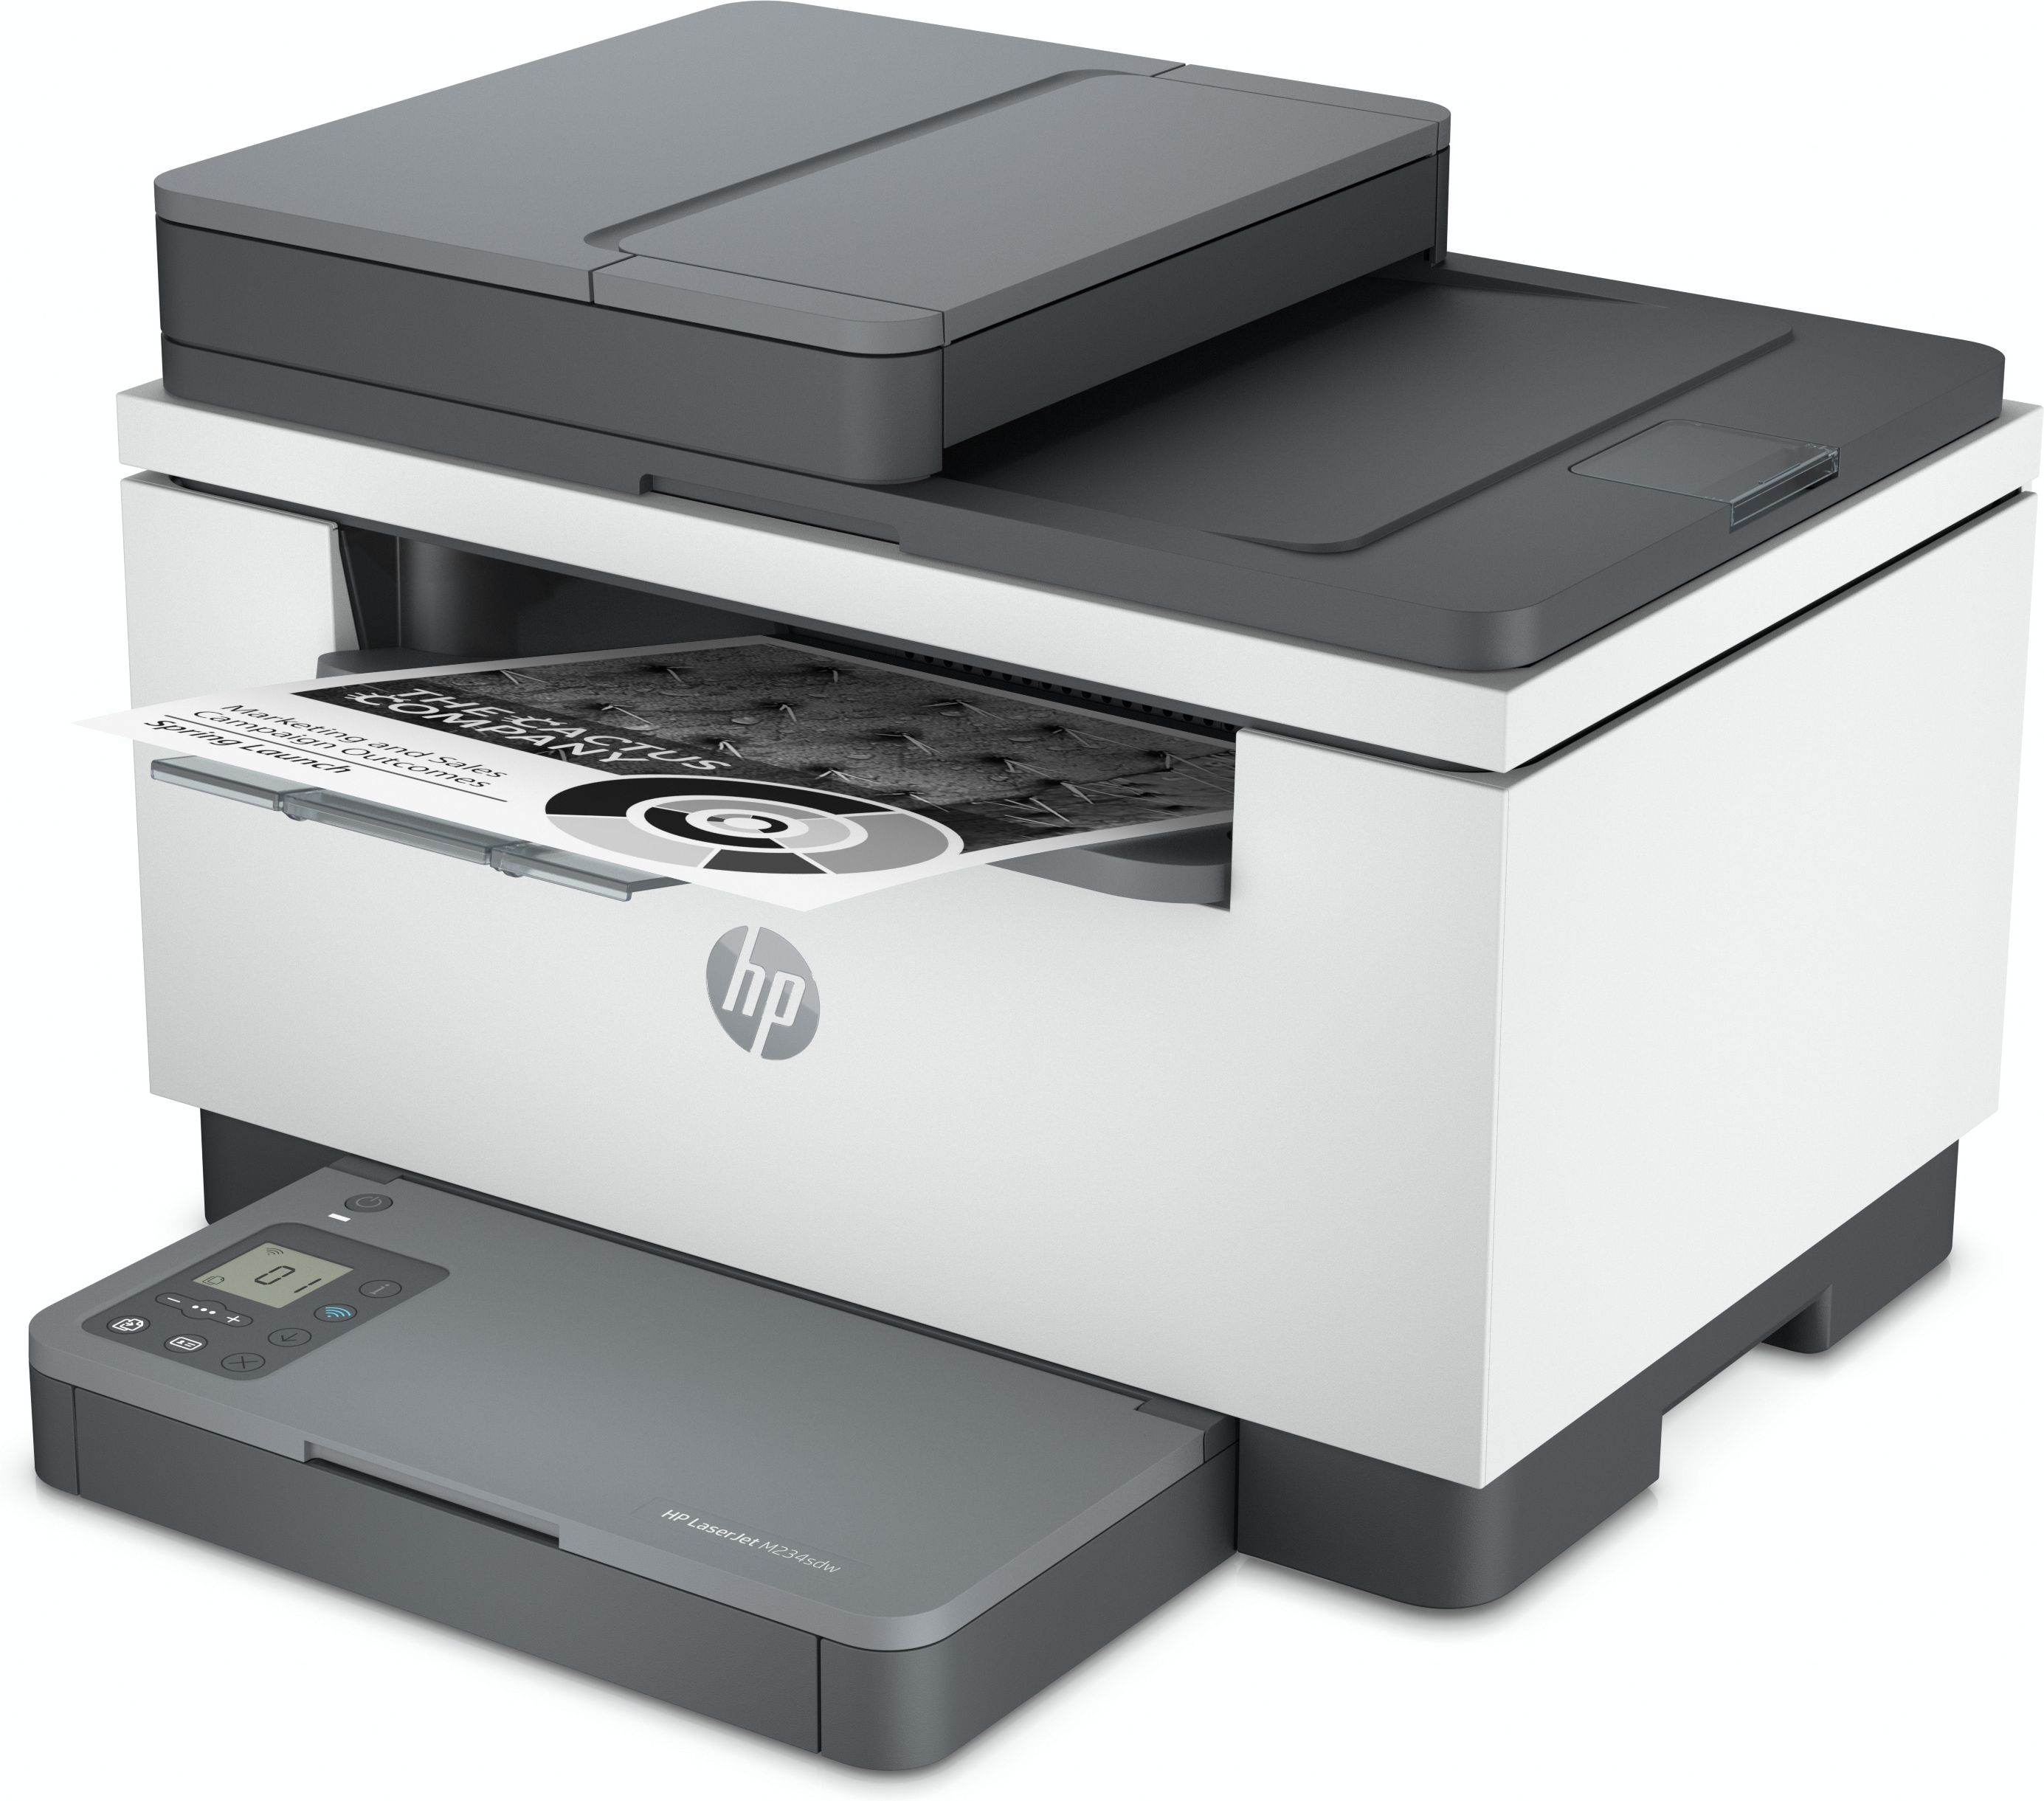 HP LaserJet MFP M234sdw Printer, Black and white, Printer for Small office, Print, copy, scan, Two-sided printing; Scan to email; Scan to PDF_3